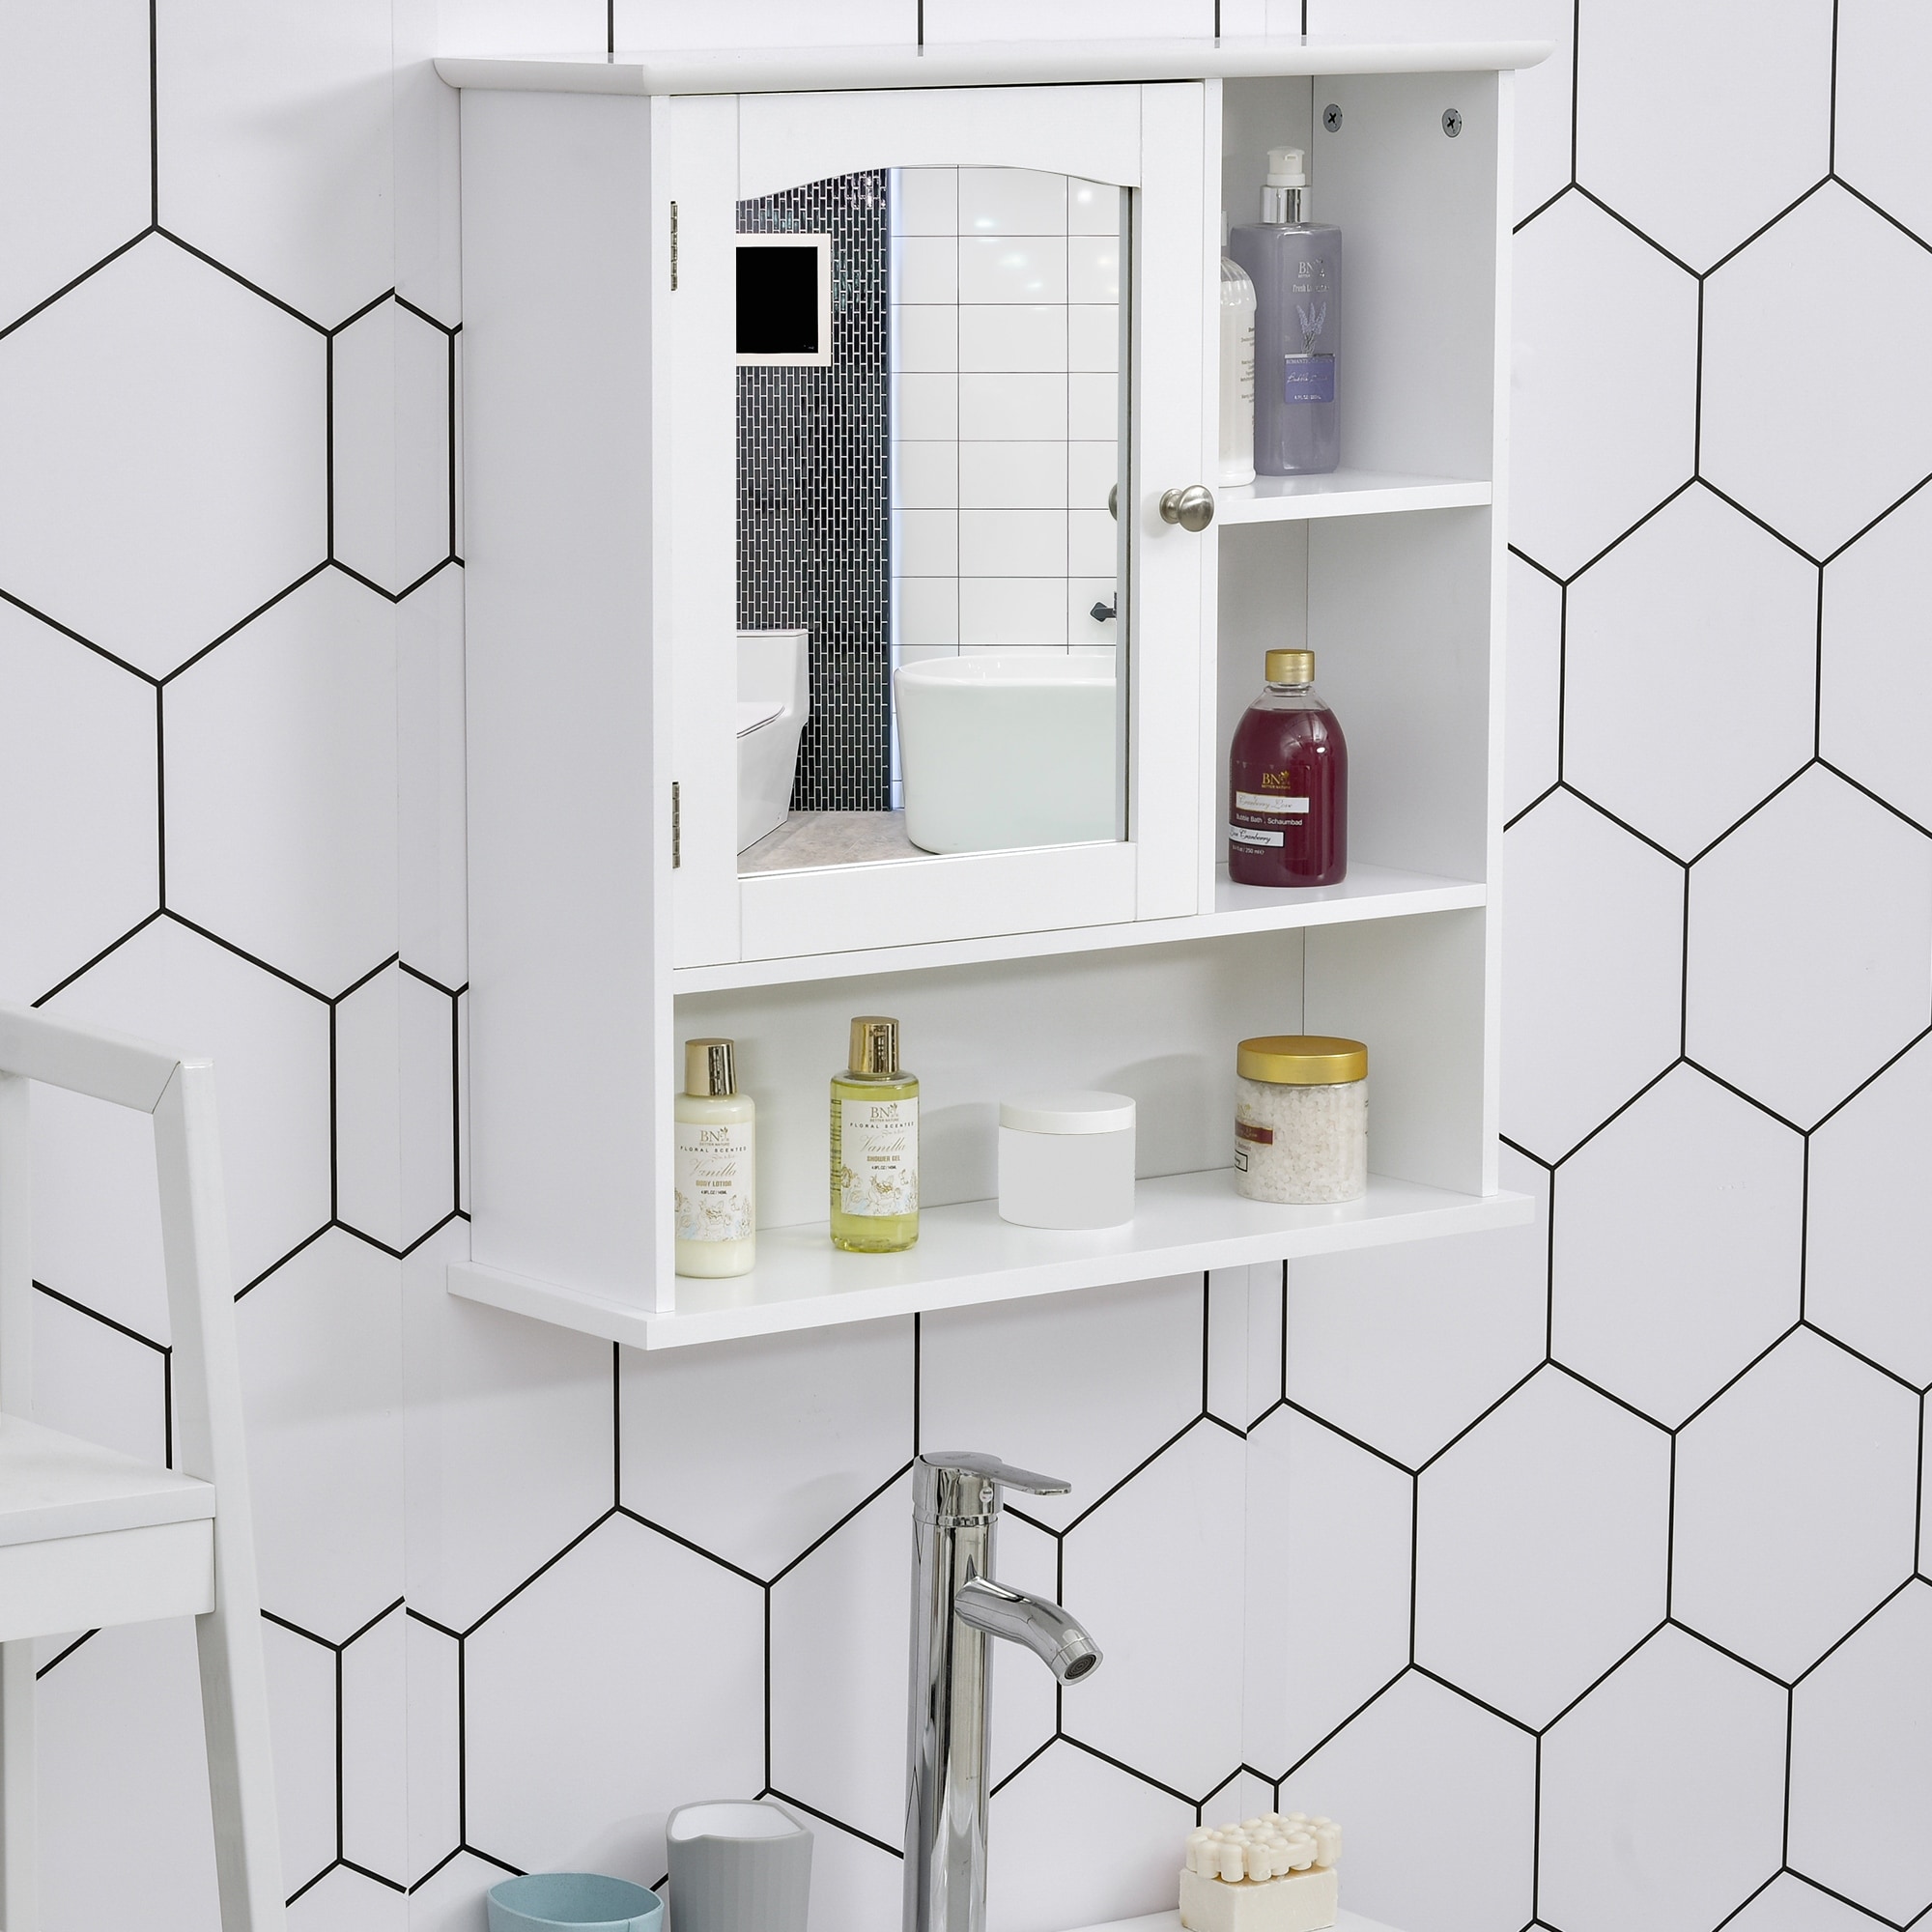 https://ak1.ostkcdn.com/images/products/is/images/direct/899a123426ae544590bb26a6d2f797c684520e87/kleankin-Wall-Mounted-Bathroom-Storage-Cabinet-Organizer-with-Mirror%2C-Adjustable-Shelf%2C-and-Magnetic-Door-Design%2C-White.jpg